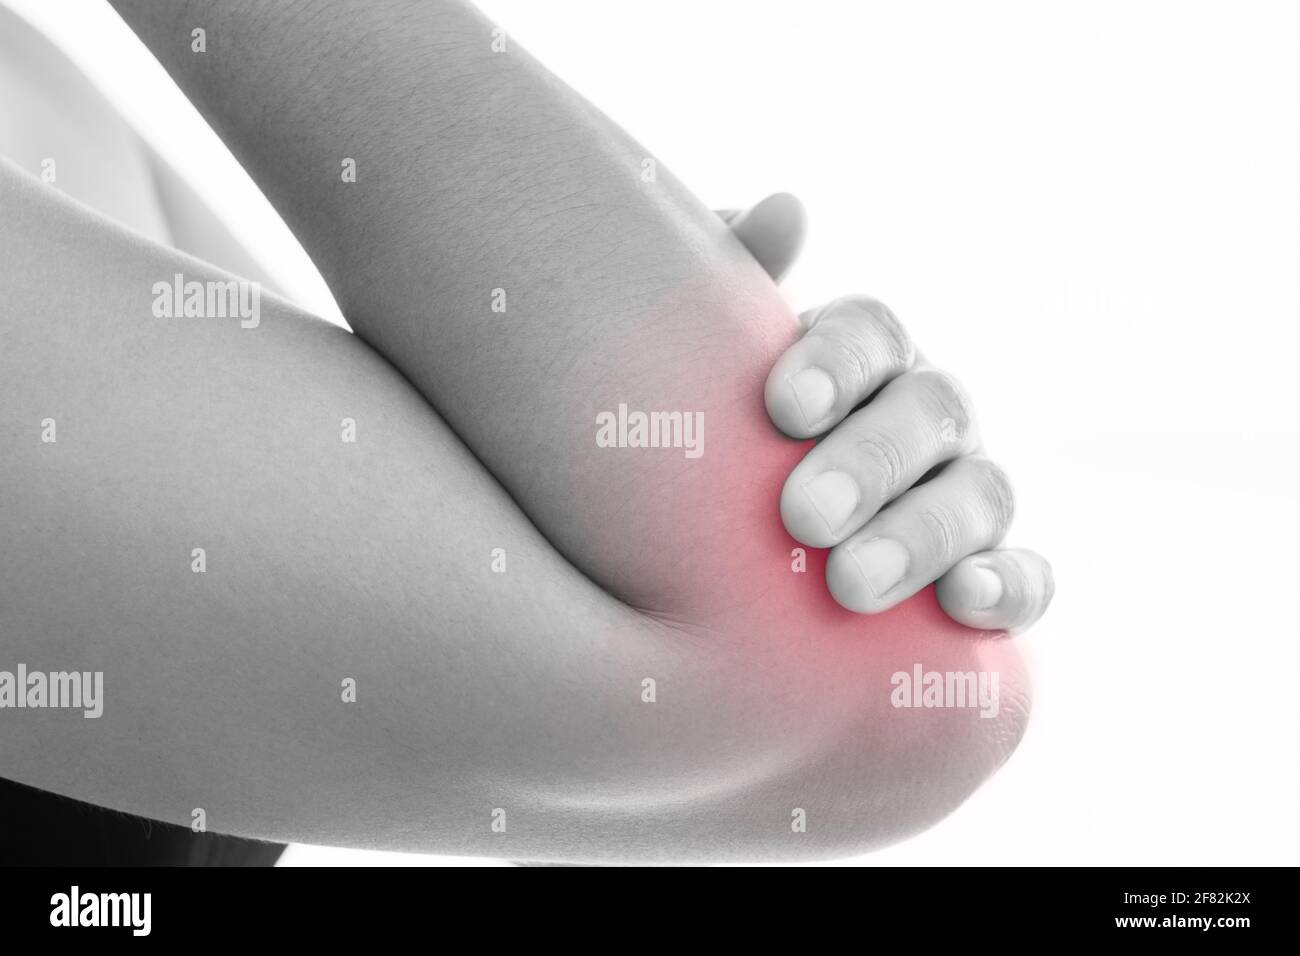 Lateral view of a young women elbow muscle pain. Red around the pain area Stock Photo